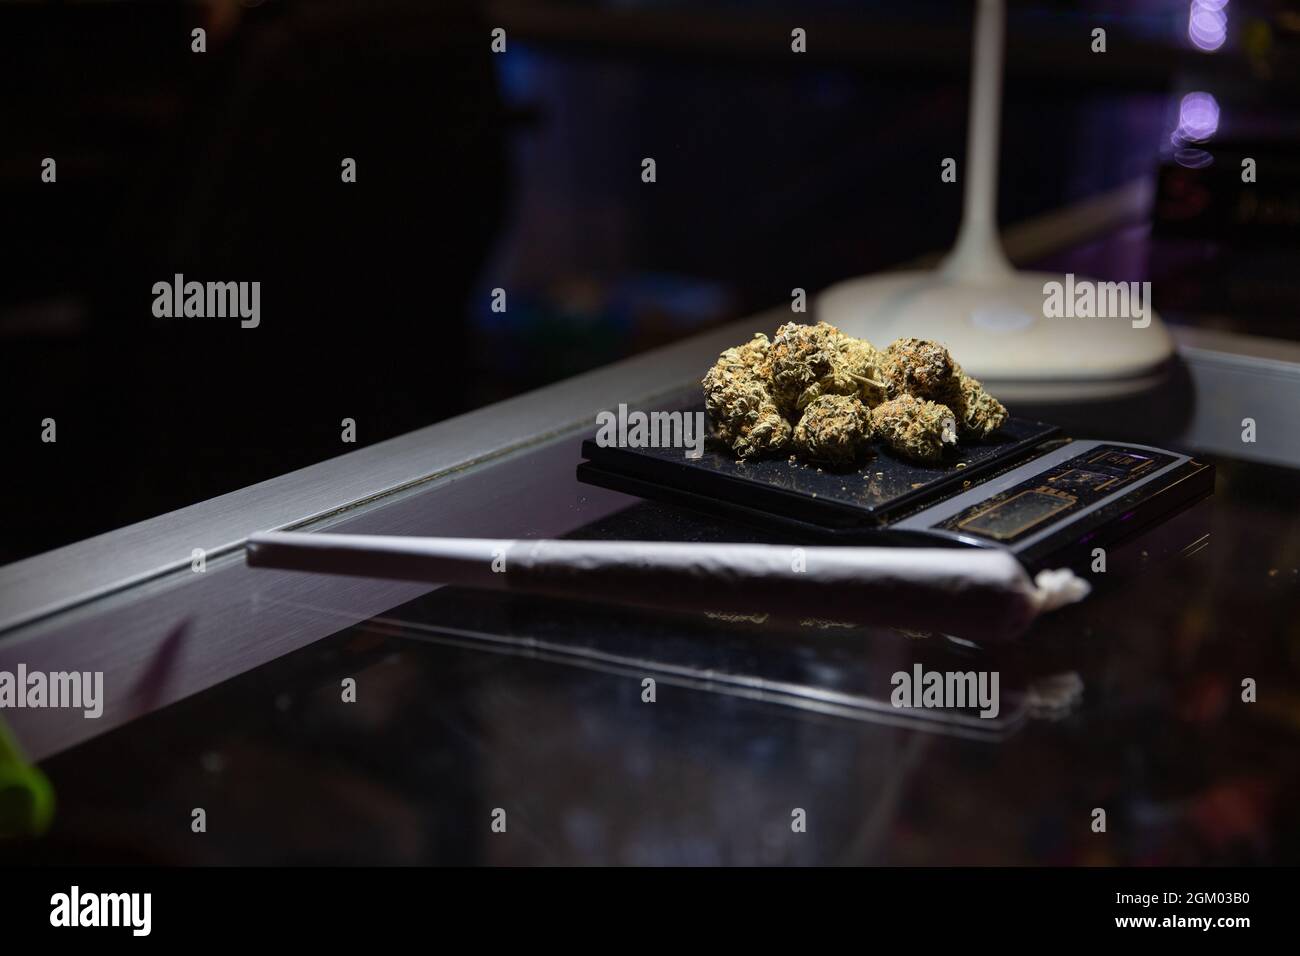 Close-up on raw marijuana placed on a weighing scale next to a rolled joint - focus on raw marijuana. Stock Photo